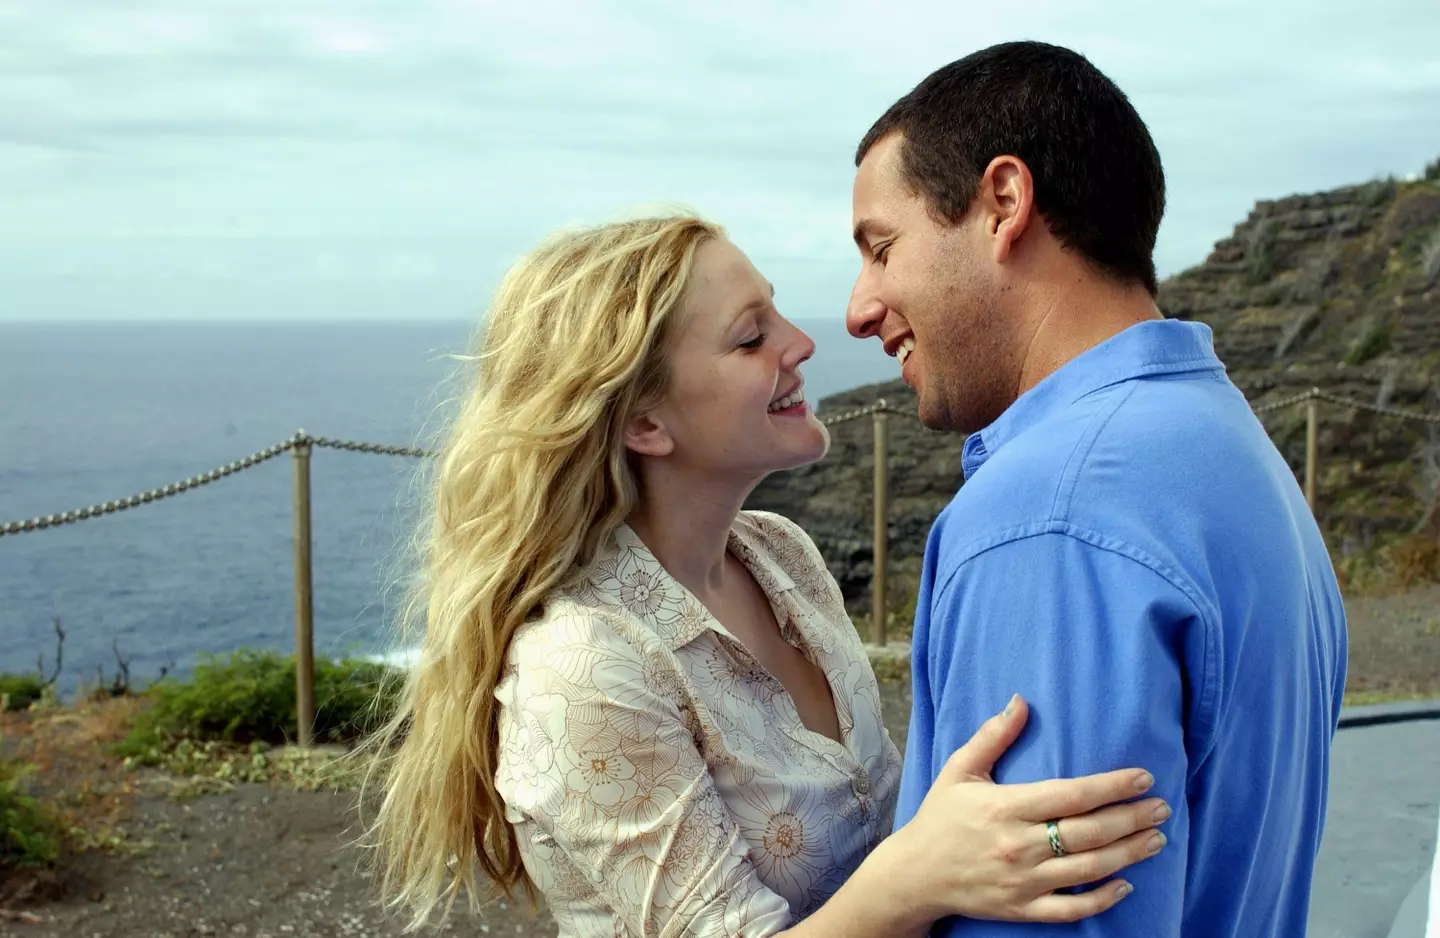 The pair have starred in several rom coms, including 50 First Dates.